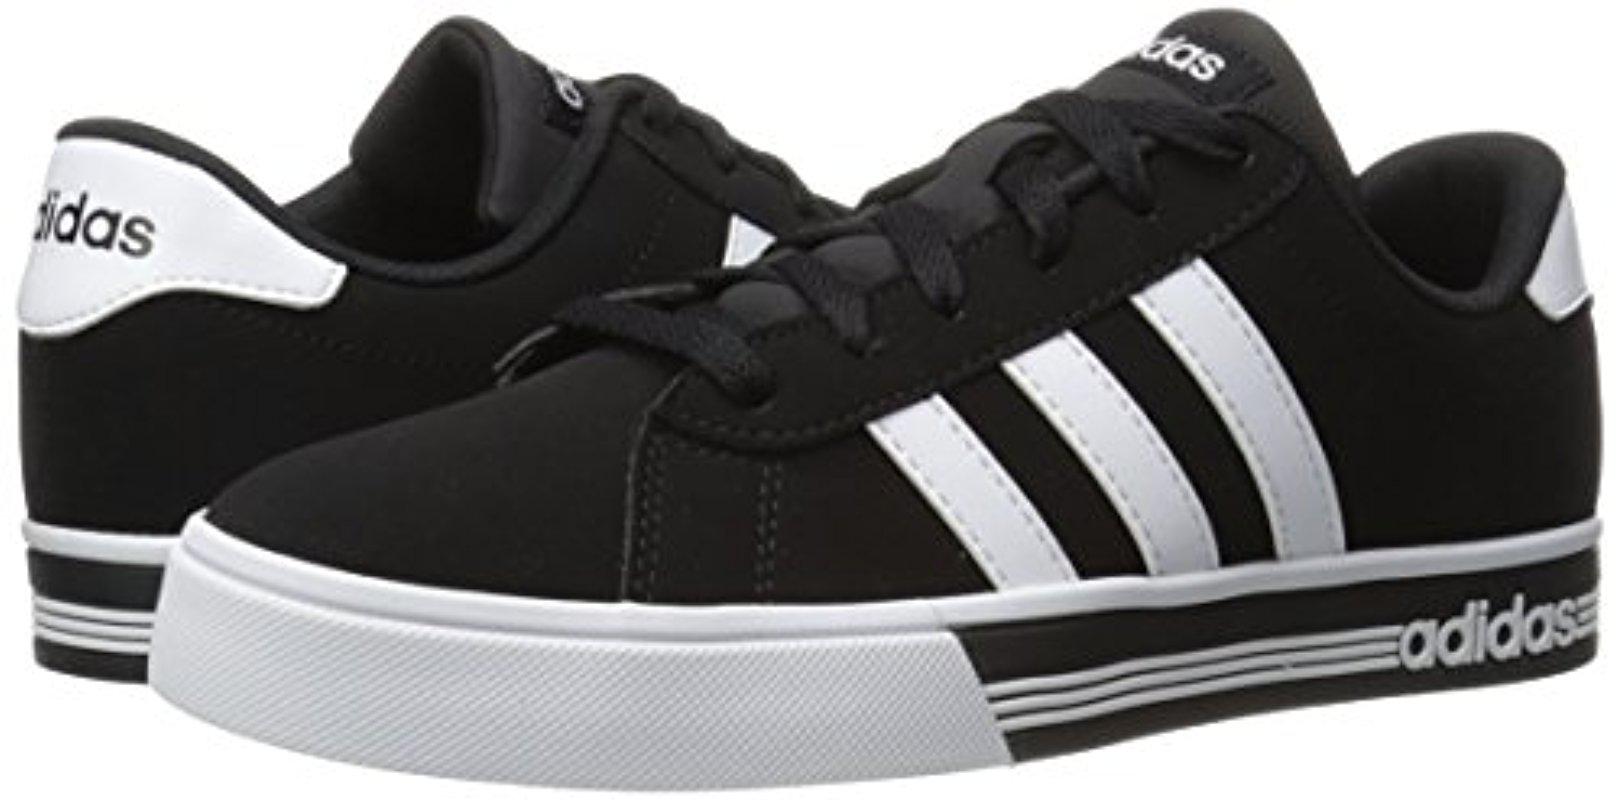 adidas Synthetic Daily Team Fashion Basketball Shoe in Black/White/Black  (Black) for Men - Lyst